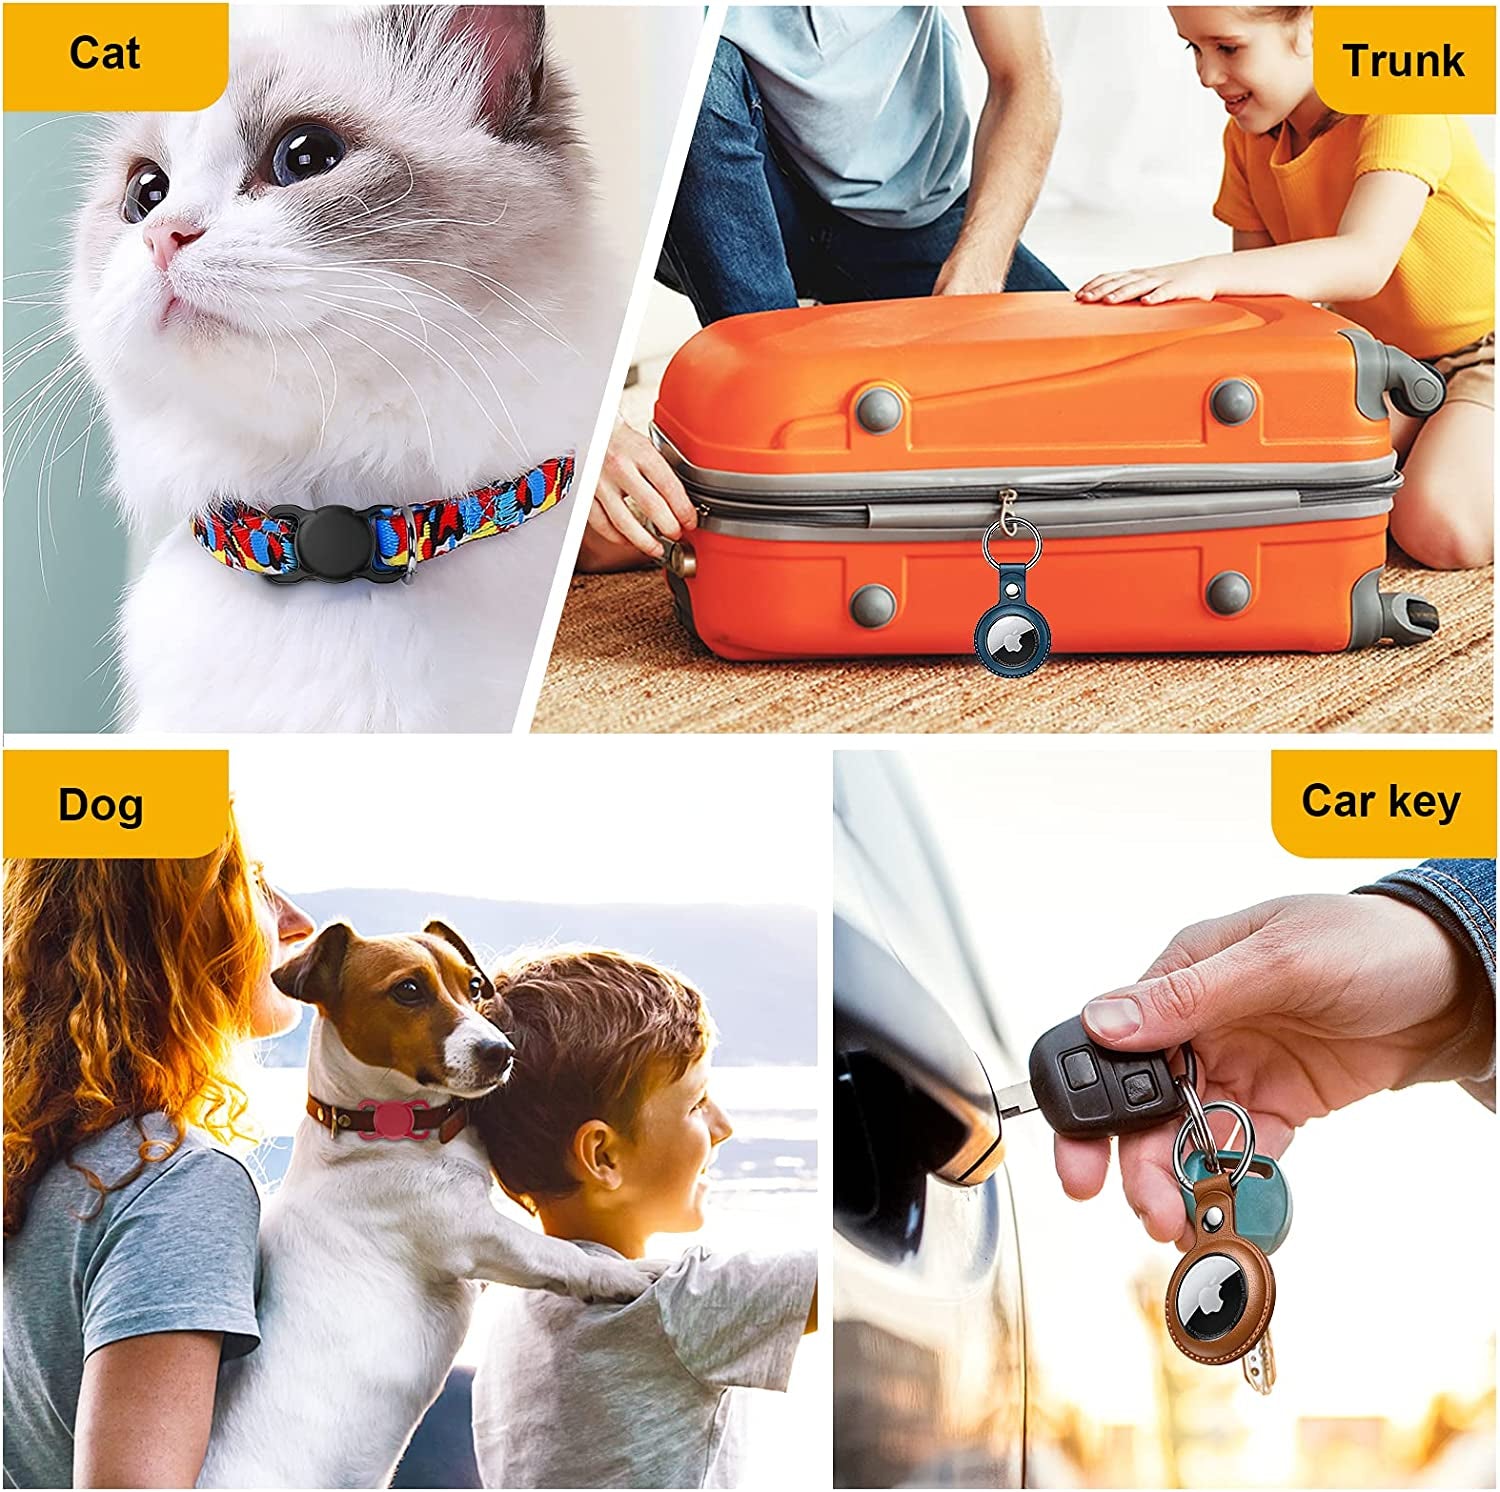 Airtag Holder, Airtag Dog Collar Holder, Airtag Case [4 Pack], Leyi PU Leather 360 Full Body Airtag Accessories + Soft Silicone Pet Loop for Apple Air Tag Holder Keychain Key Ring GPS Tracker, 4 Color